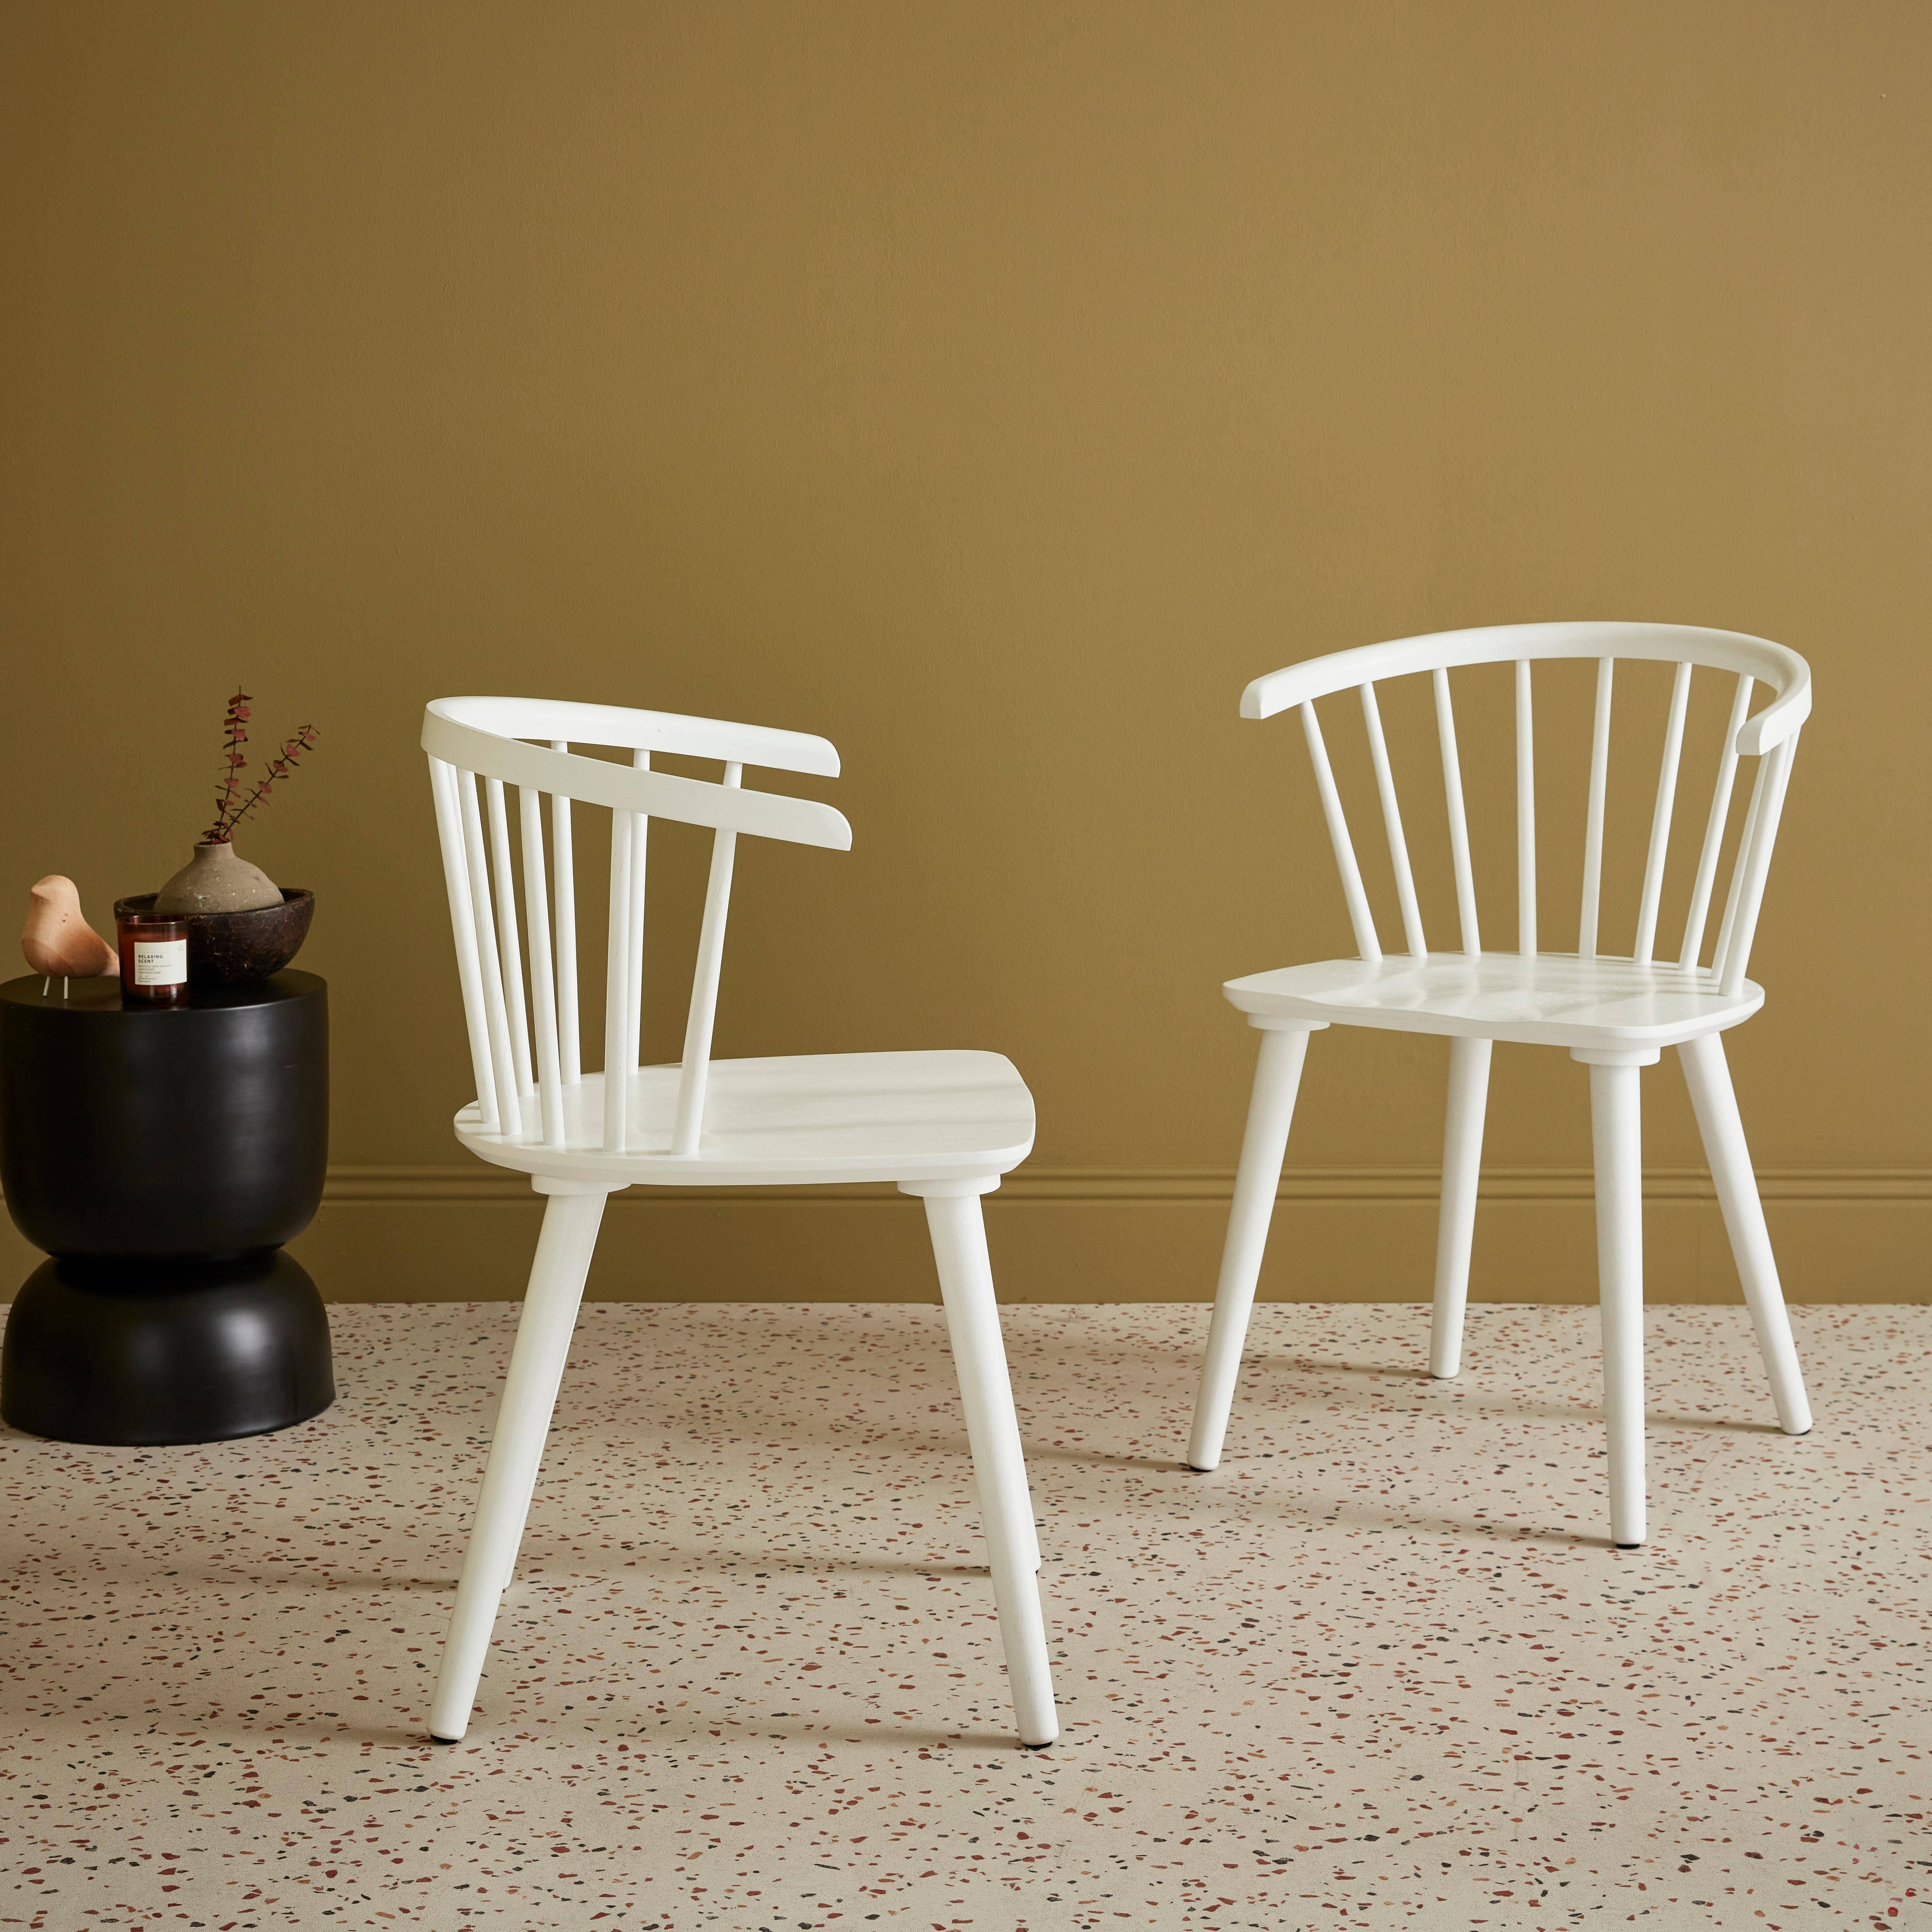 Pair of Wood and Plywood Spindle Chairs, white, L53 x W47.5 x H76cm Photo2